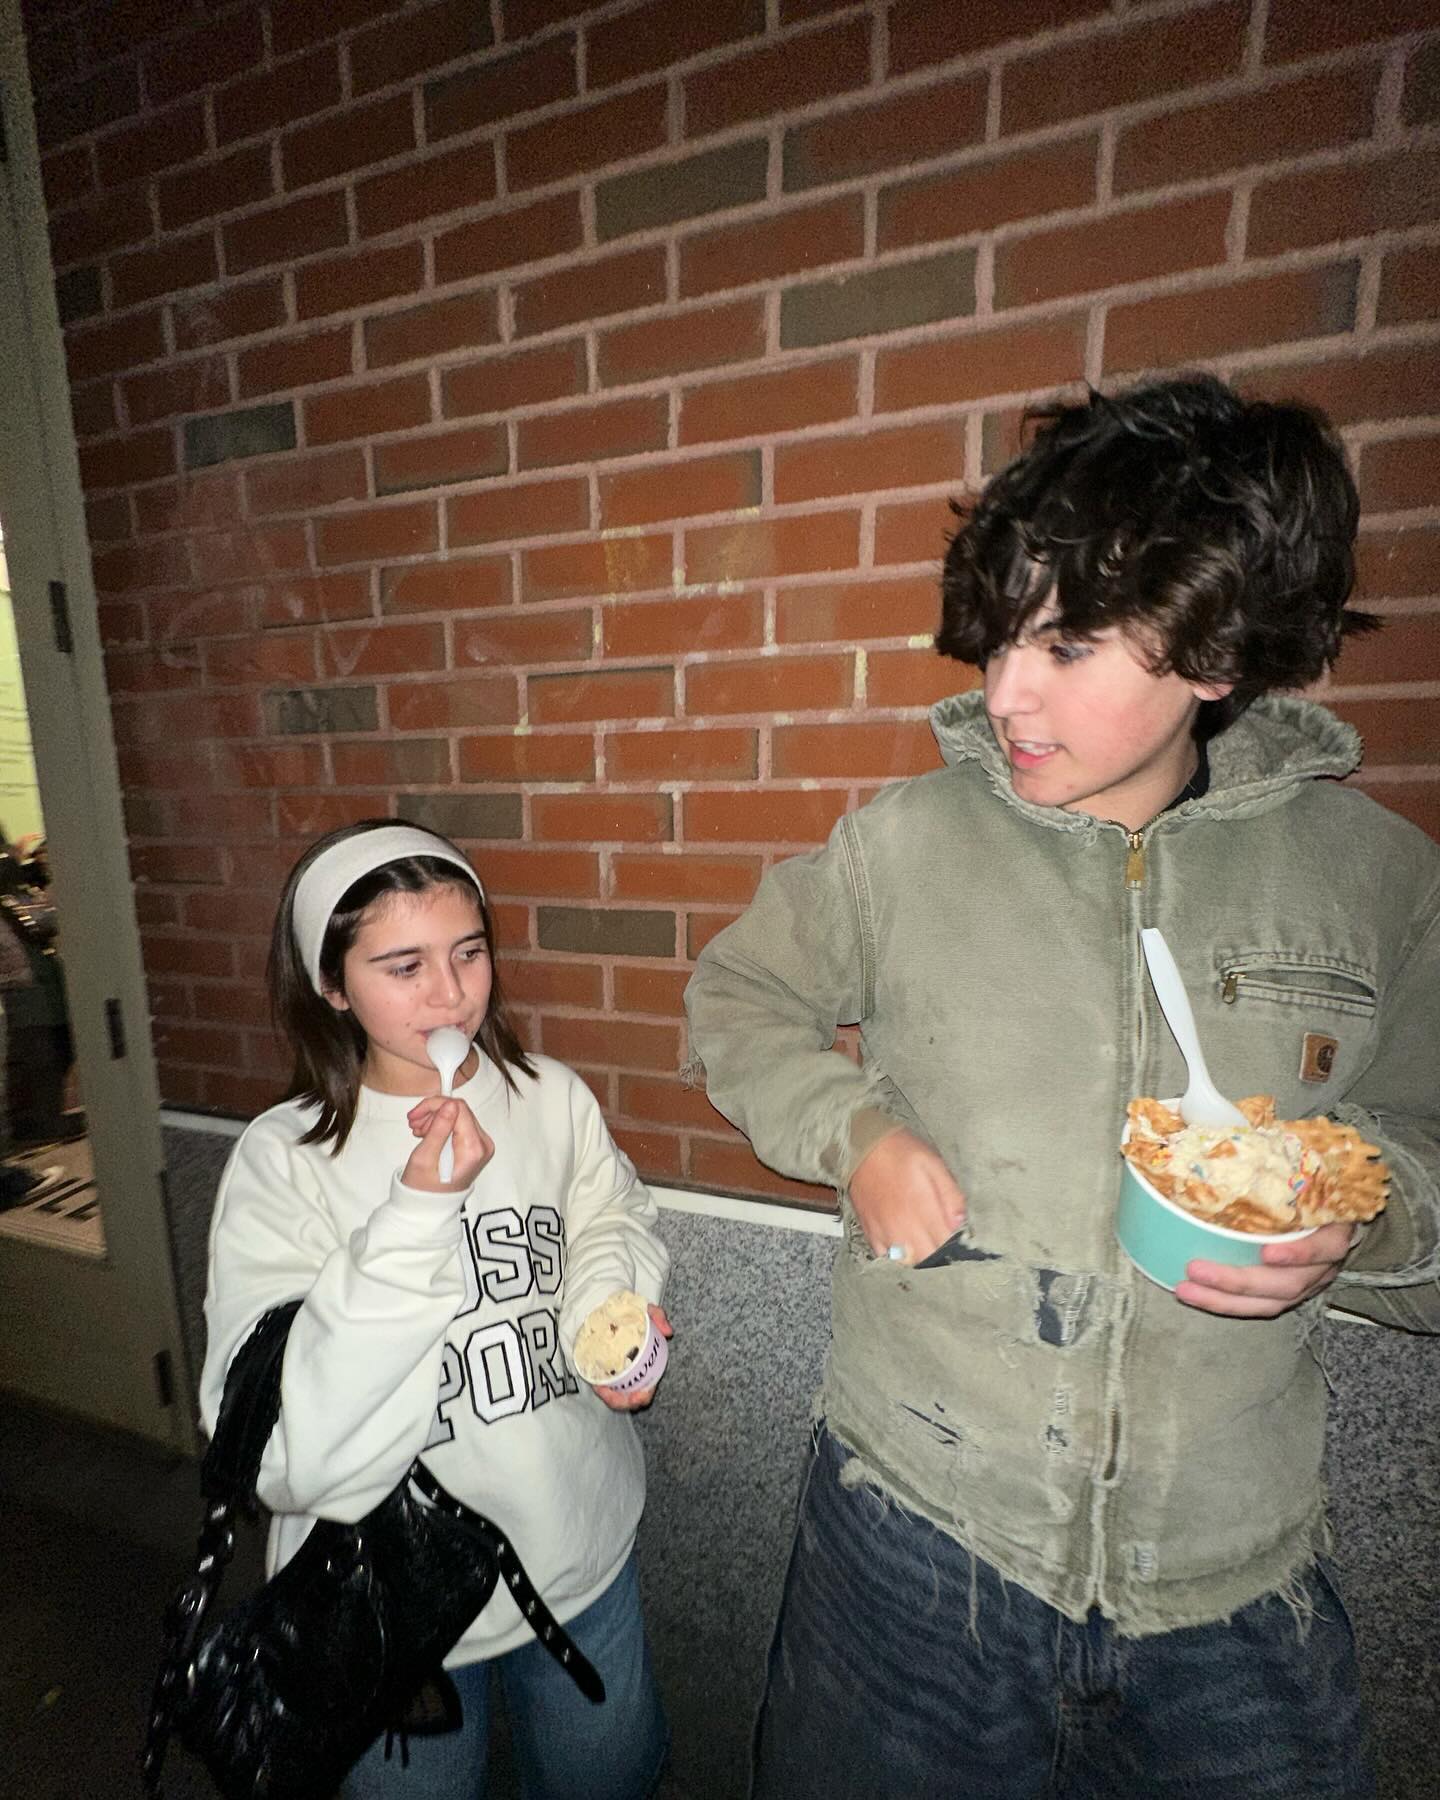 The siblings indulged in ice cream together